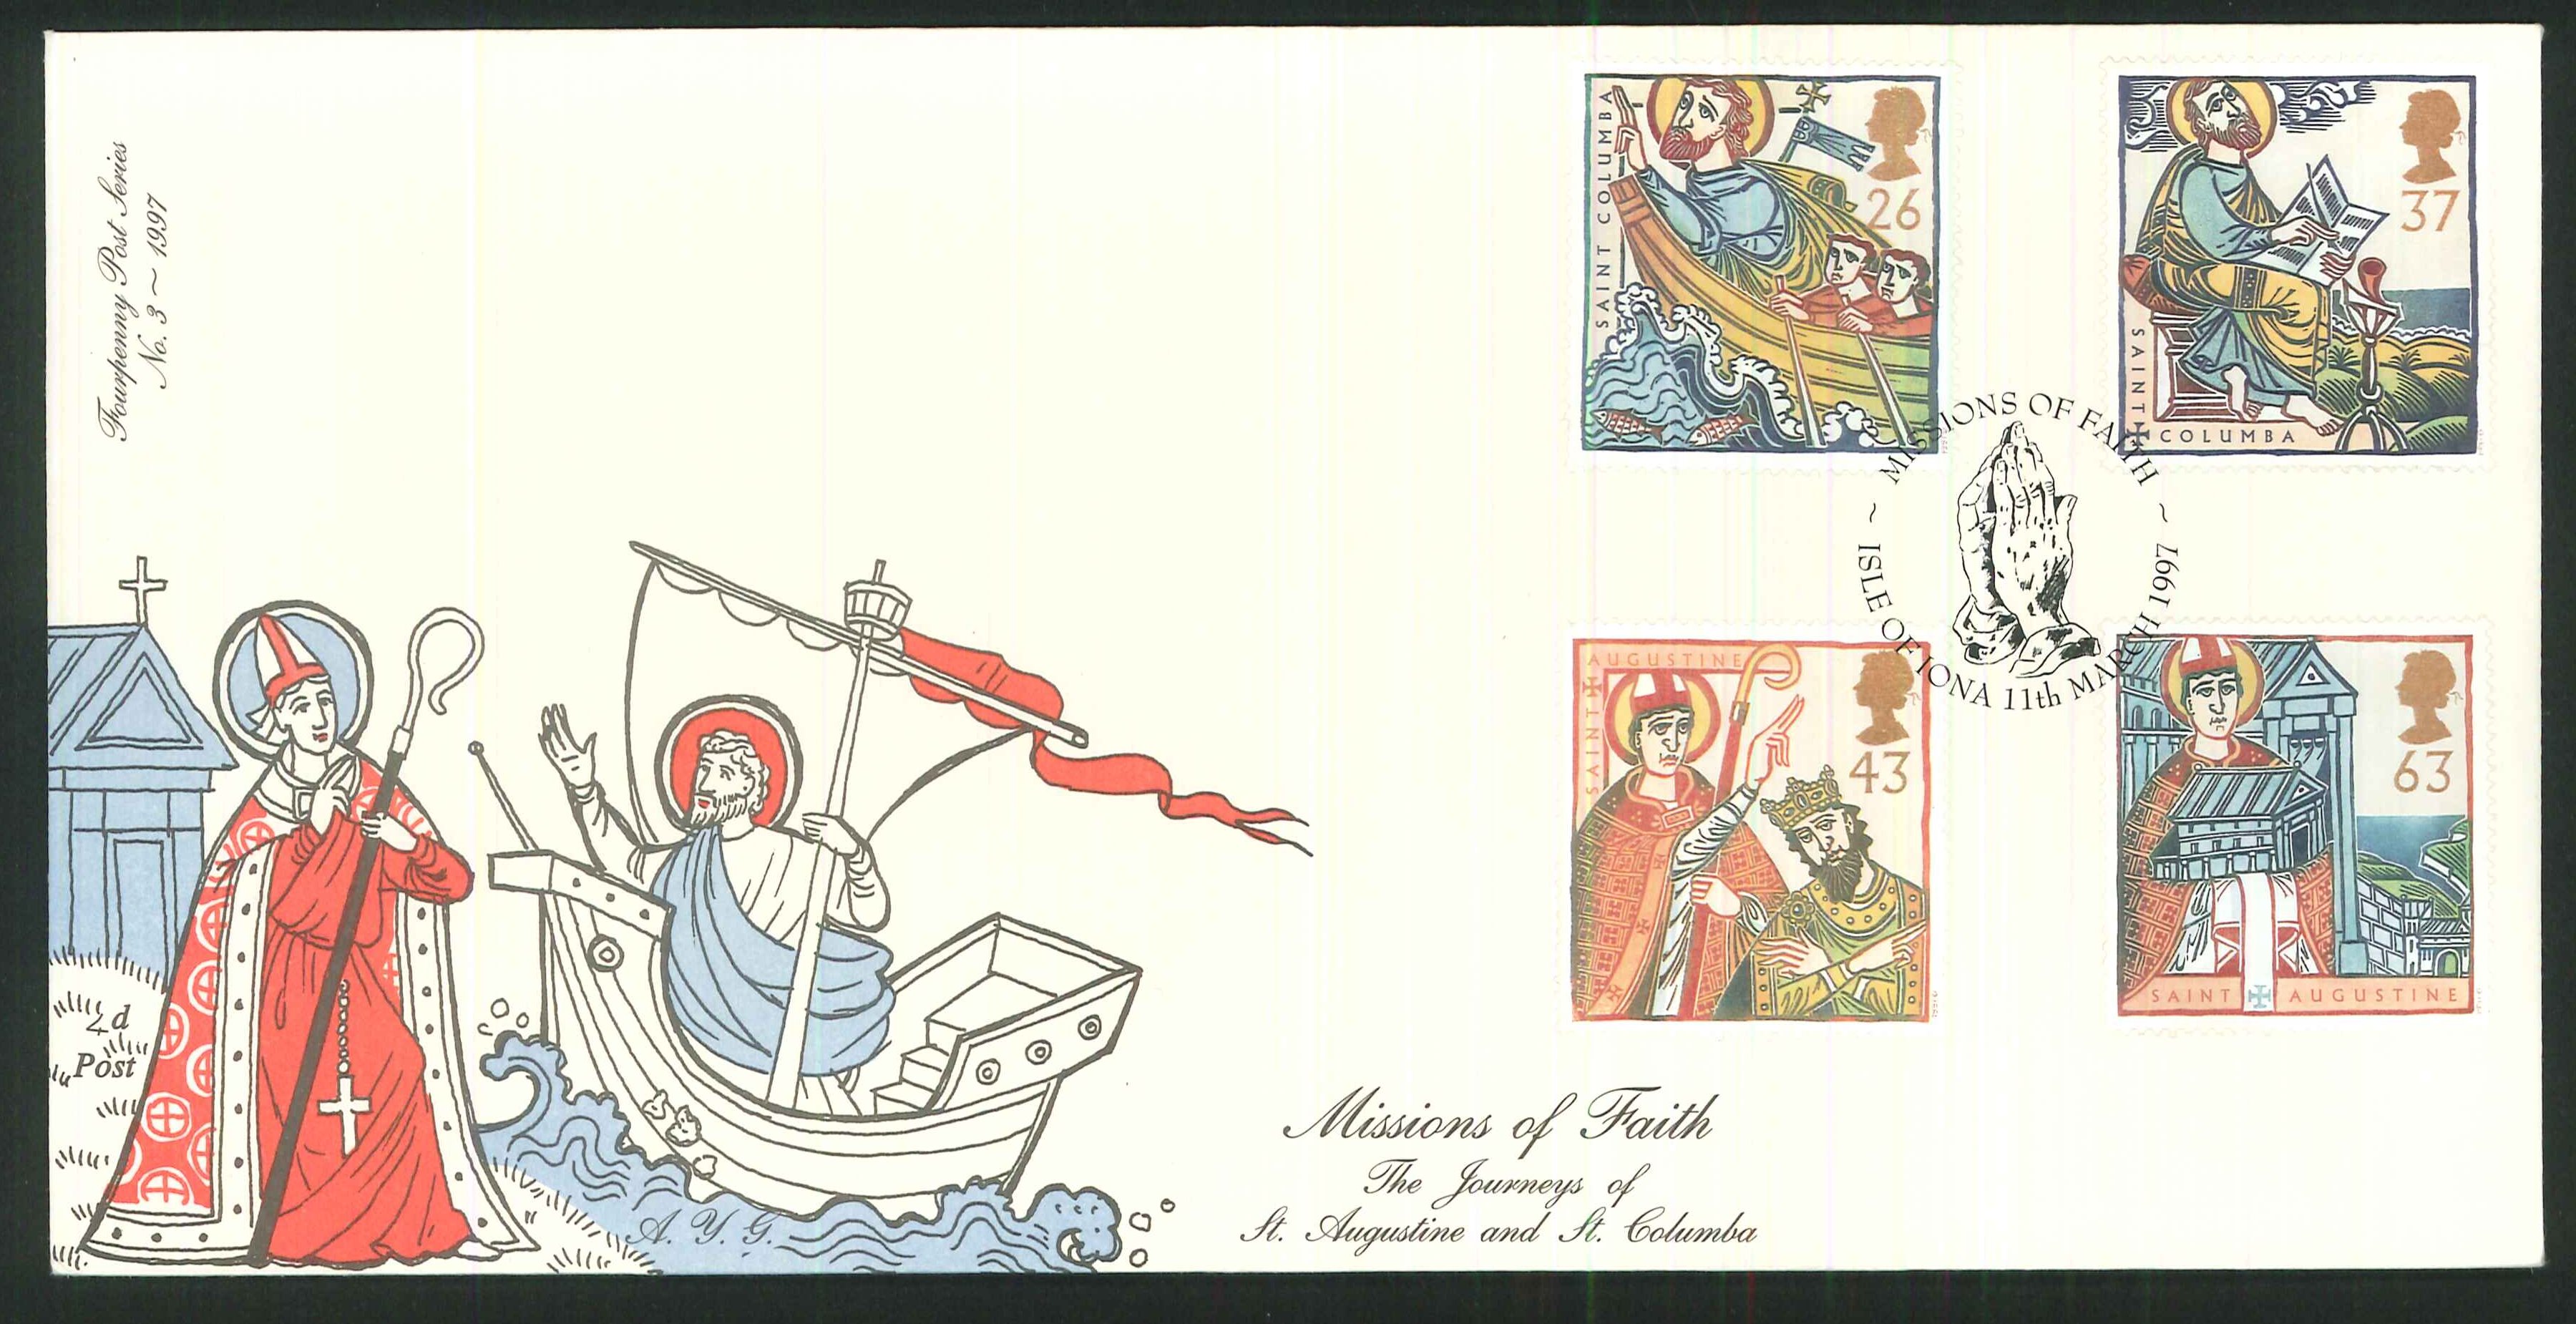 1997 - Missions of Faith, First Day Cover - Isle of Iona Postmark